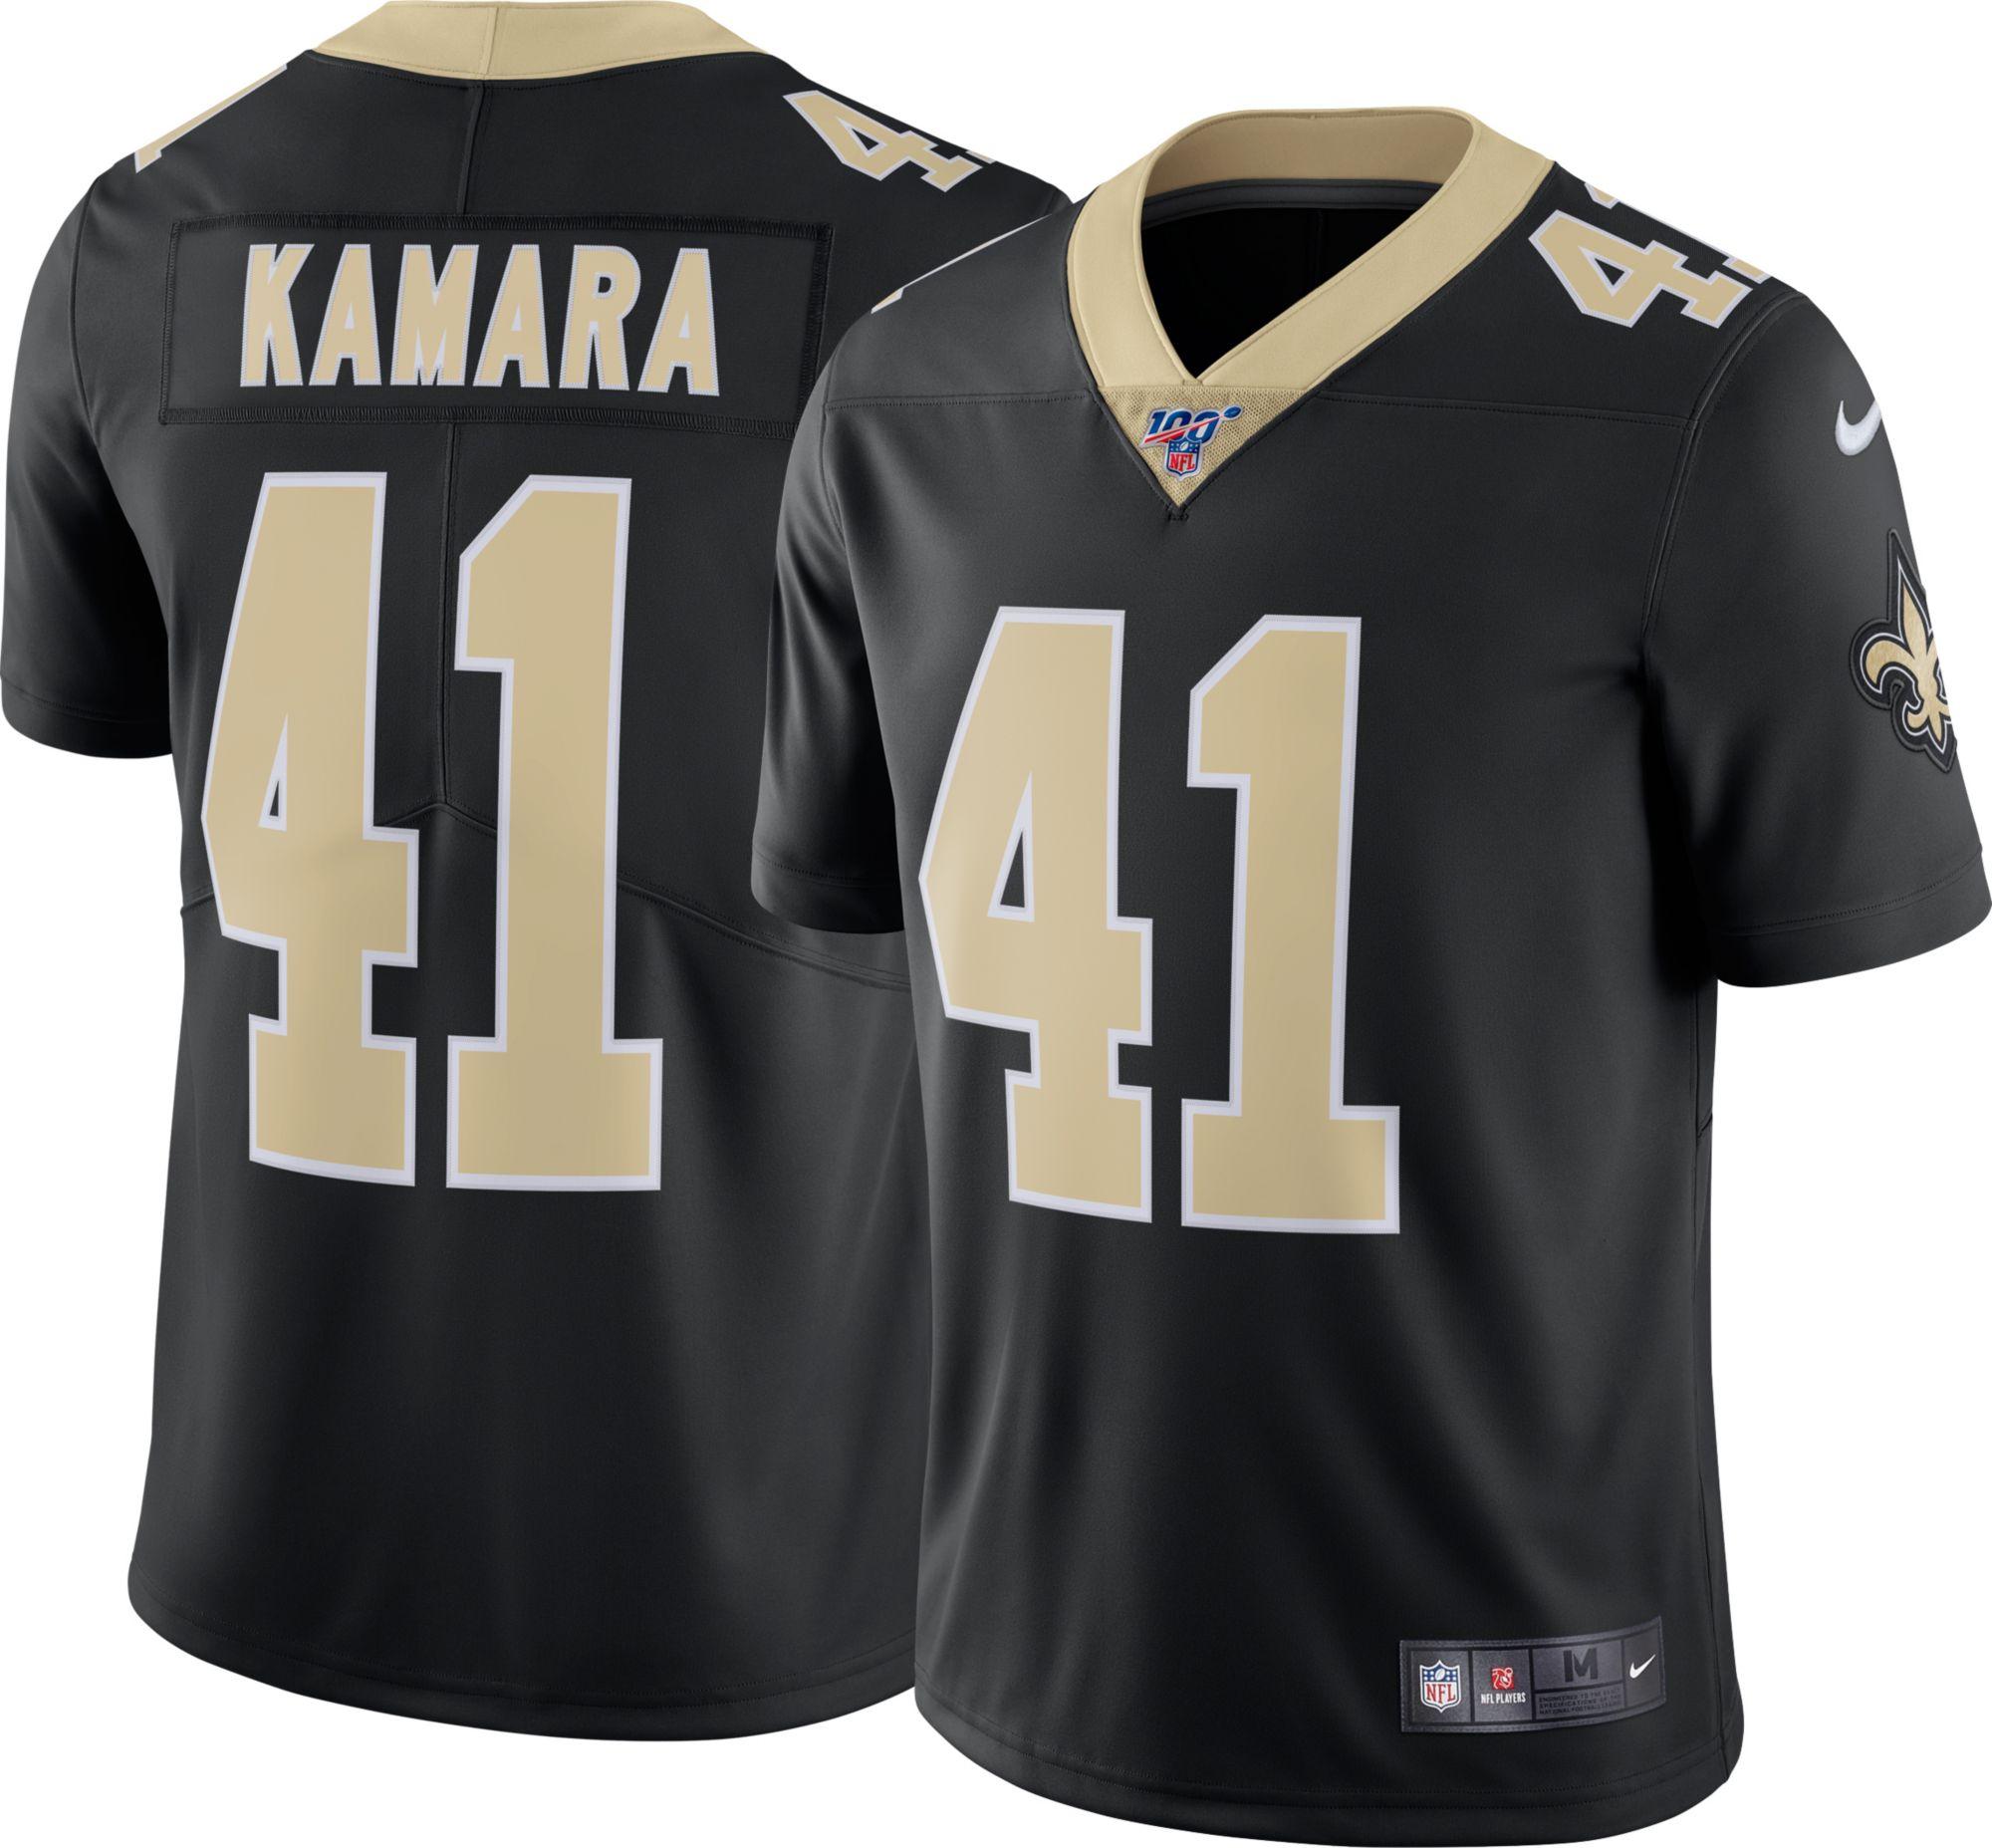 Nike Satin 100th Home Limited Jersey New Orleans Saints ...